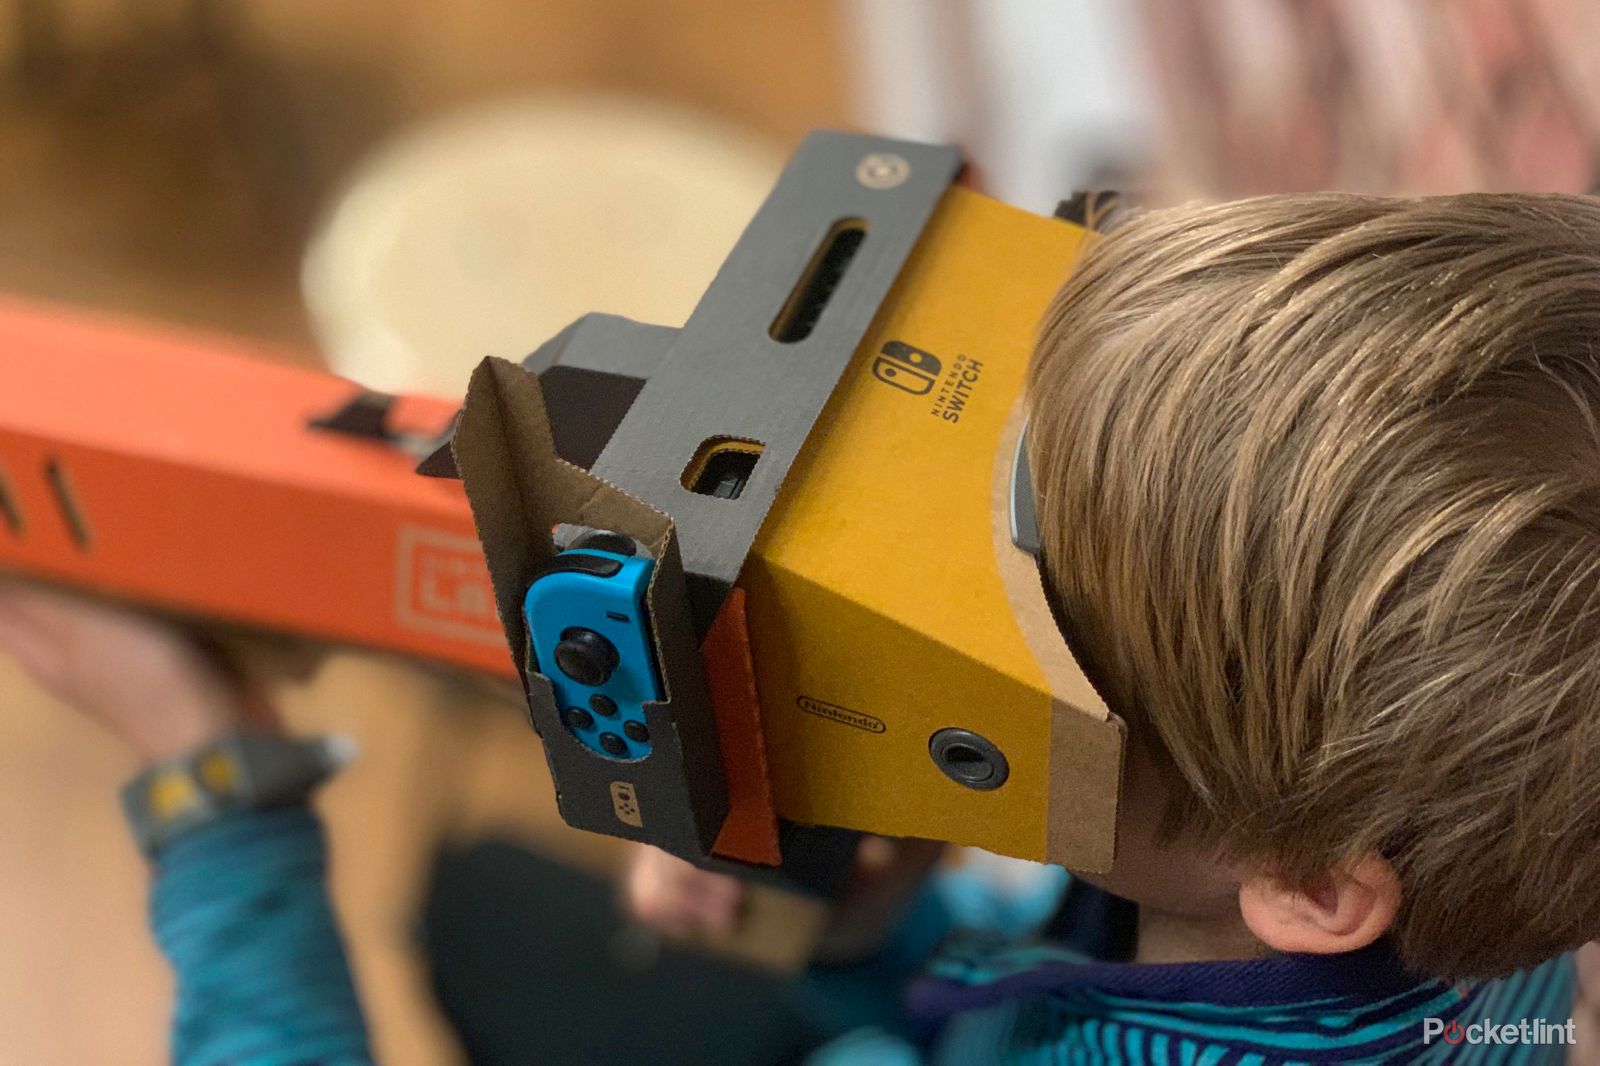 Nintendo Labo kits for Switch are just 20 each at Best Buy right now image 1